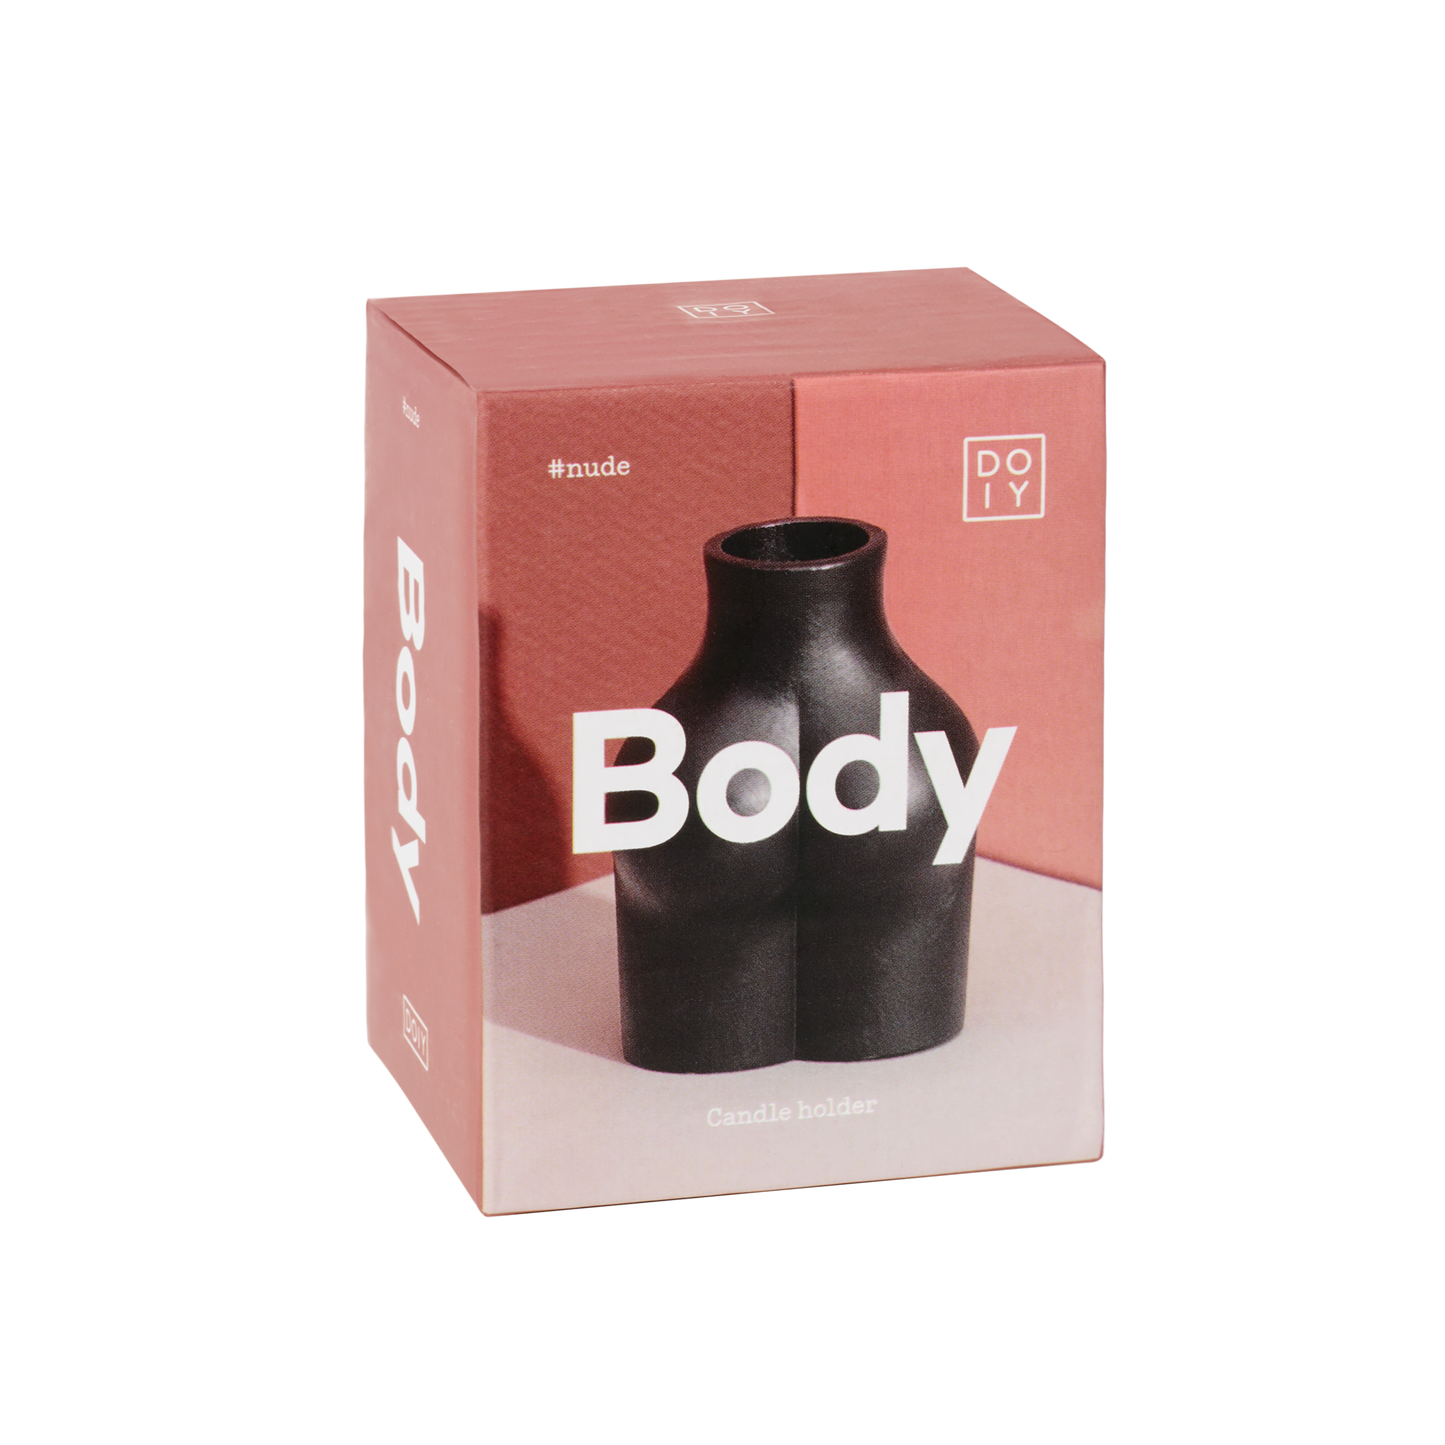 Booty Candle Holder (Black)